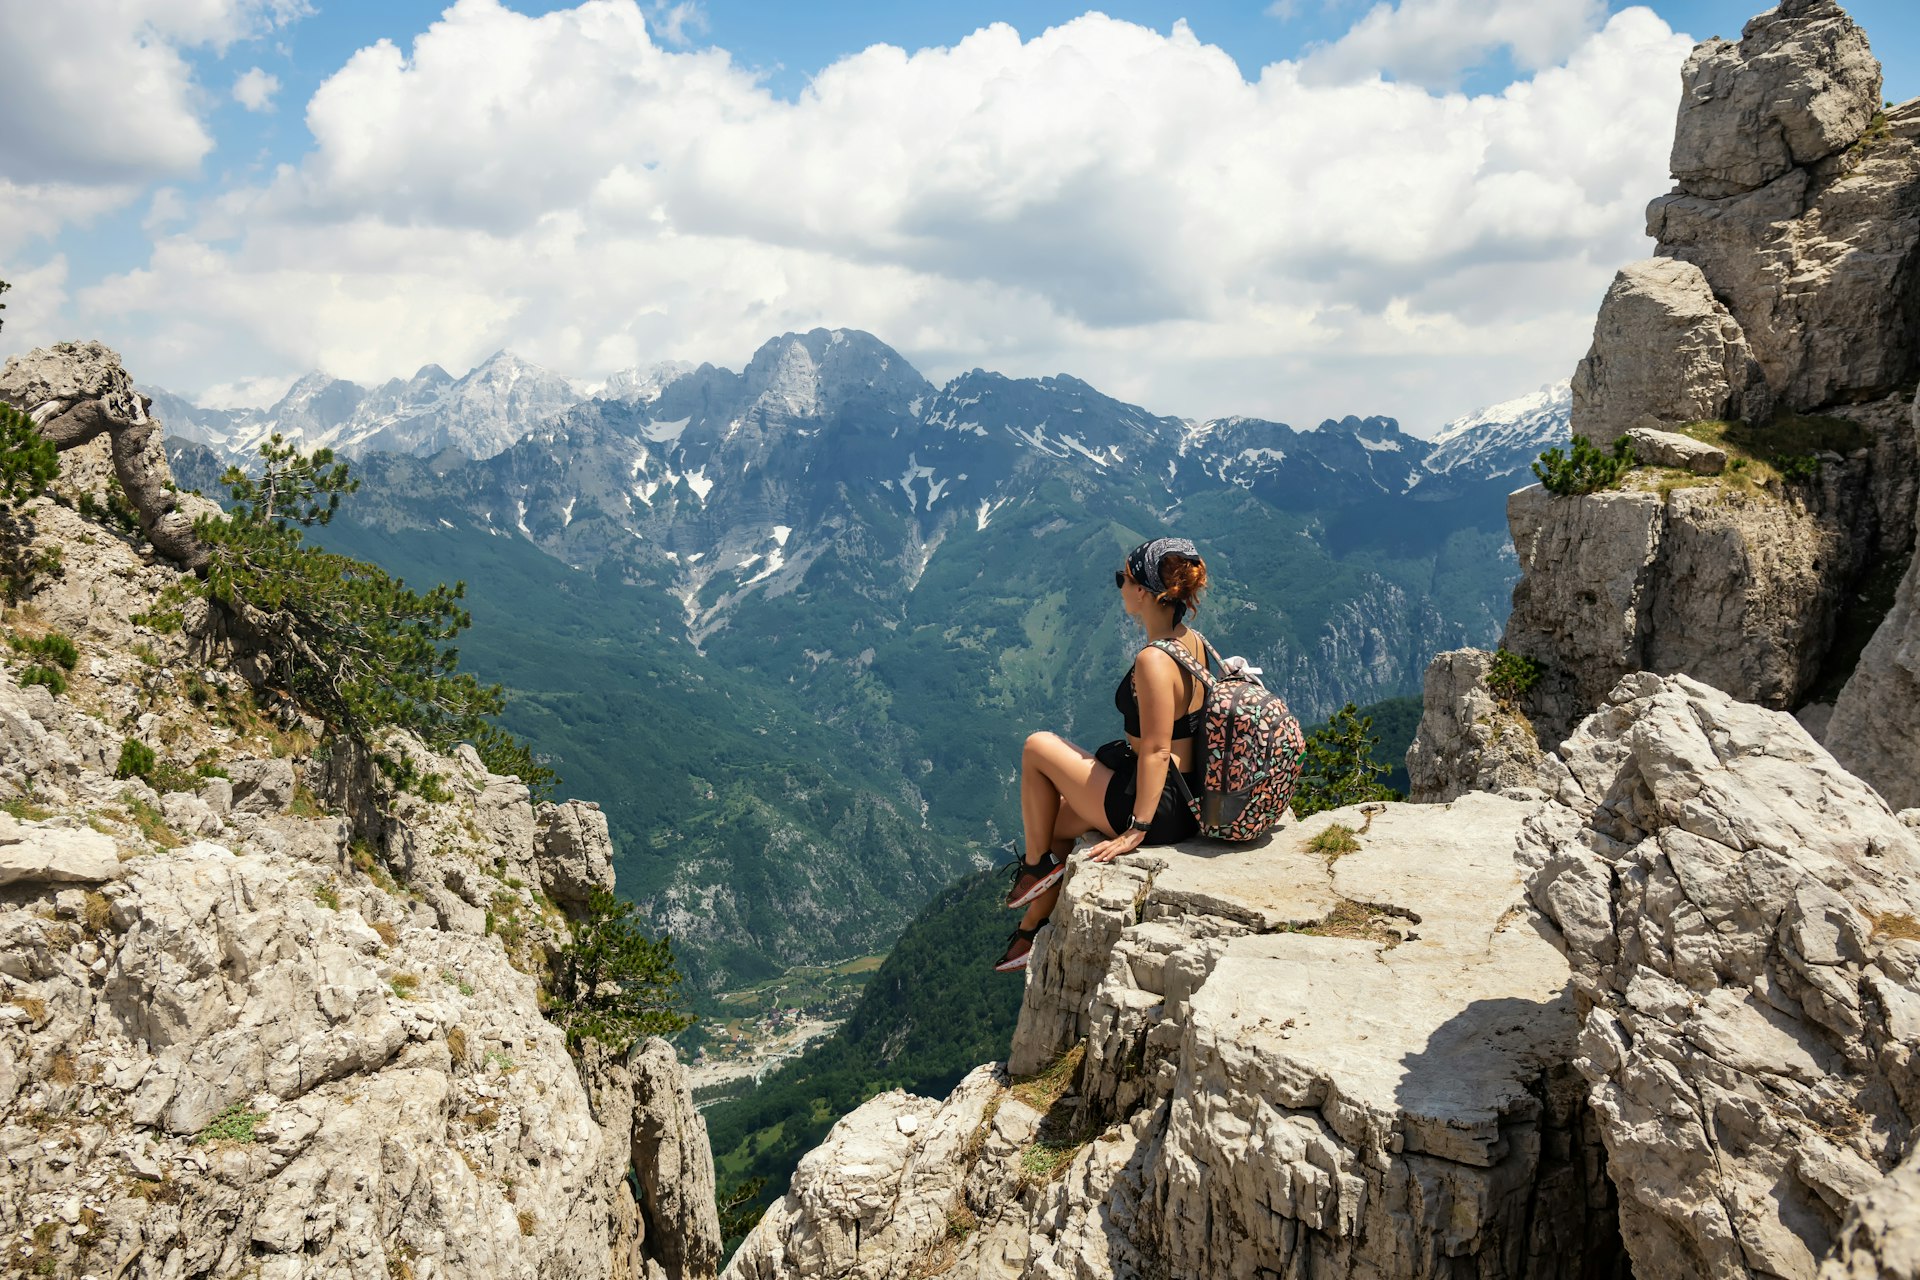 A woman sits on the edge of a hiking trail in the Albanian mountains